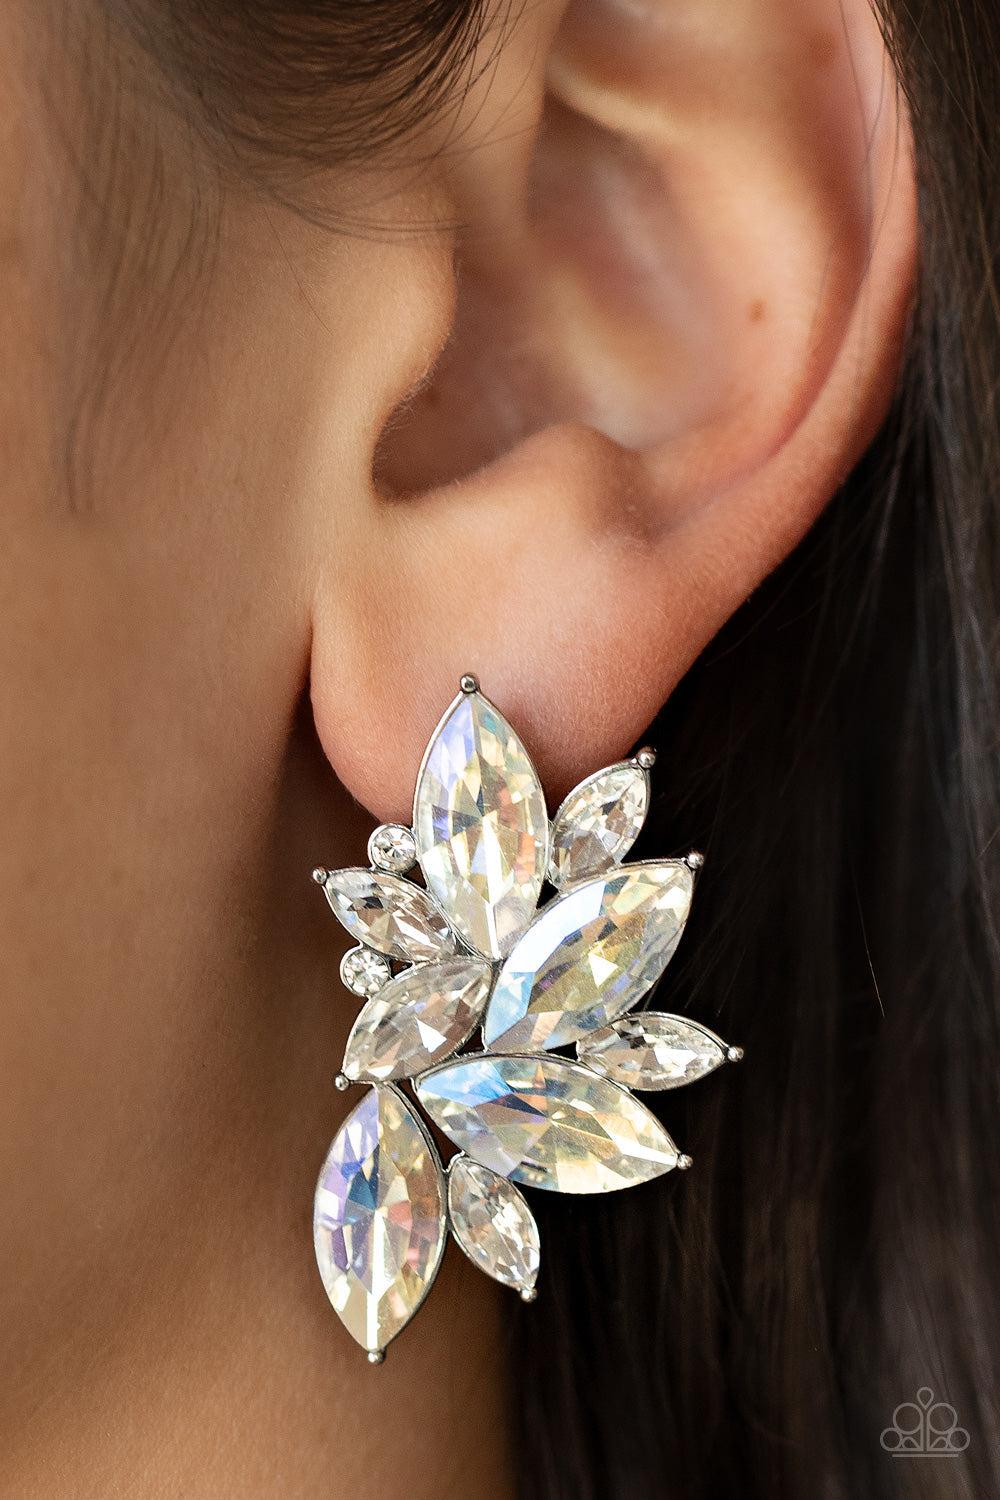 Instant Iridescence White Iridescent Rhinestone Earrings - Paparazzi Accessories-on model - CarasShop.com - $5 Jewelry by Cara Jewels